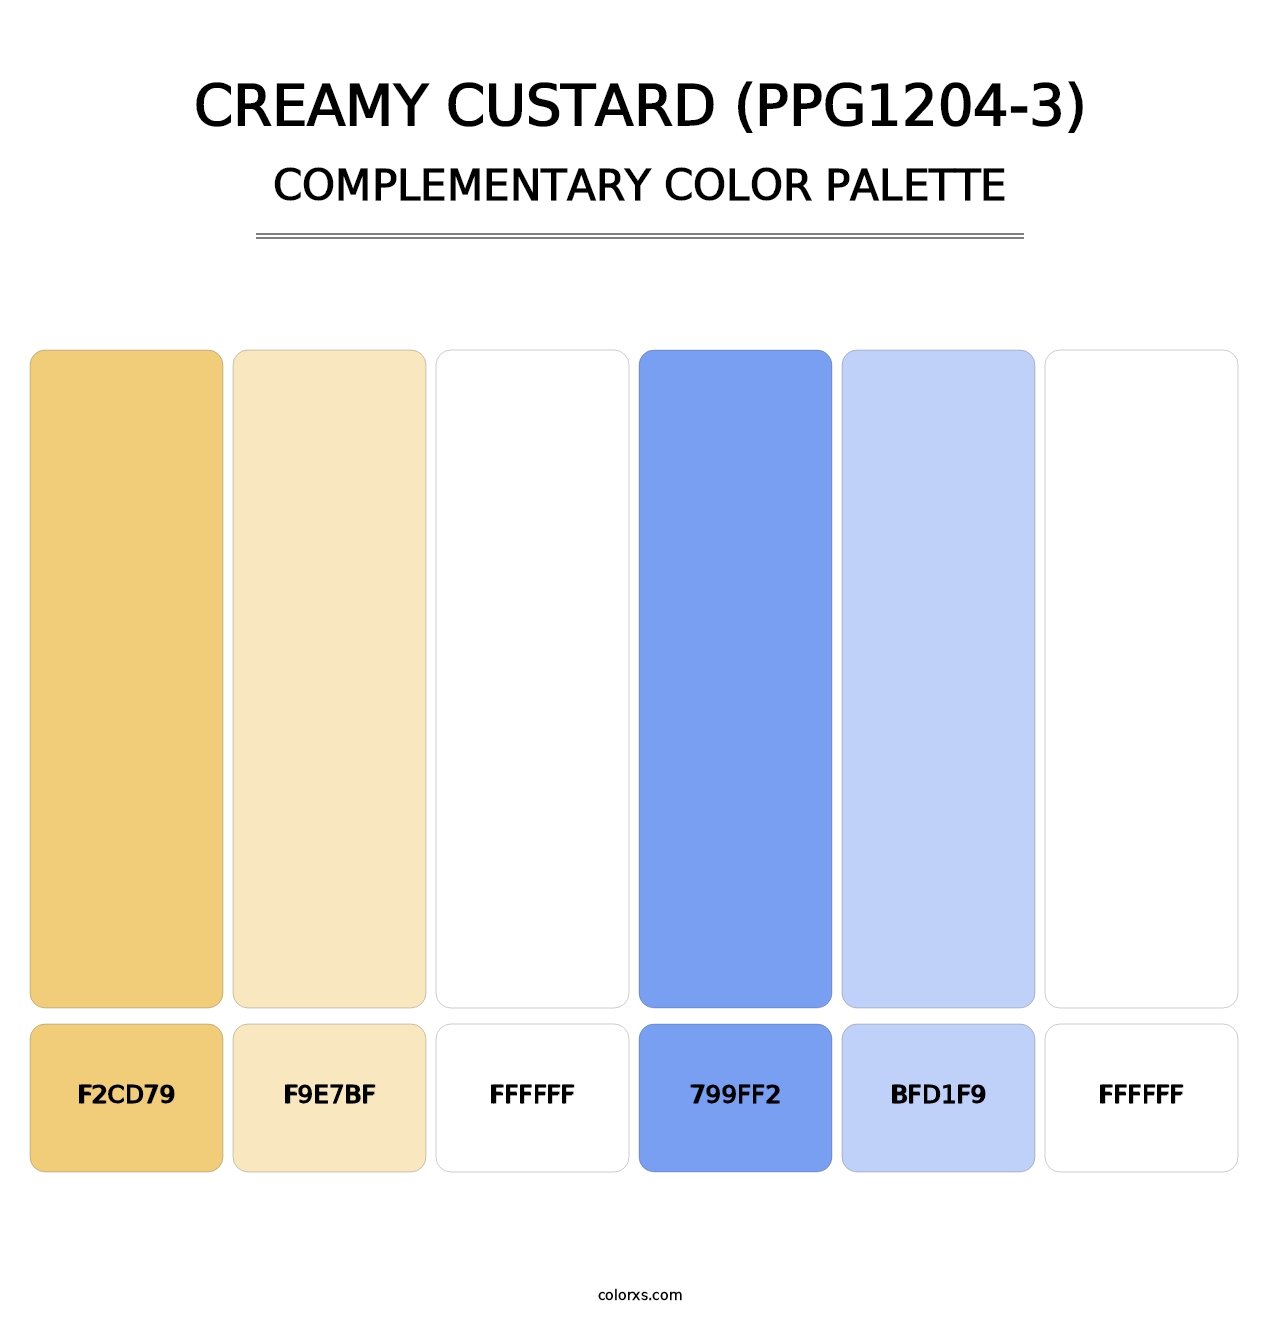 Creamy Custard (PPG1204-3) - Complementary Color Palette